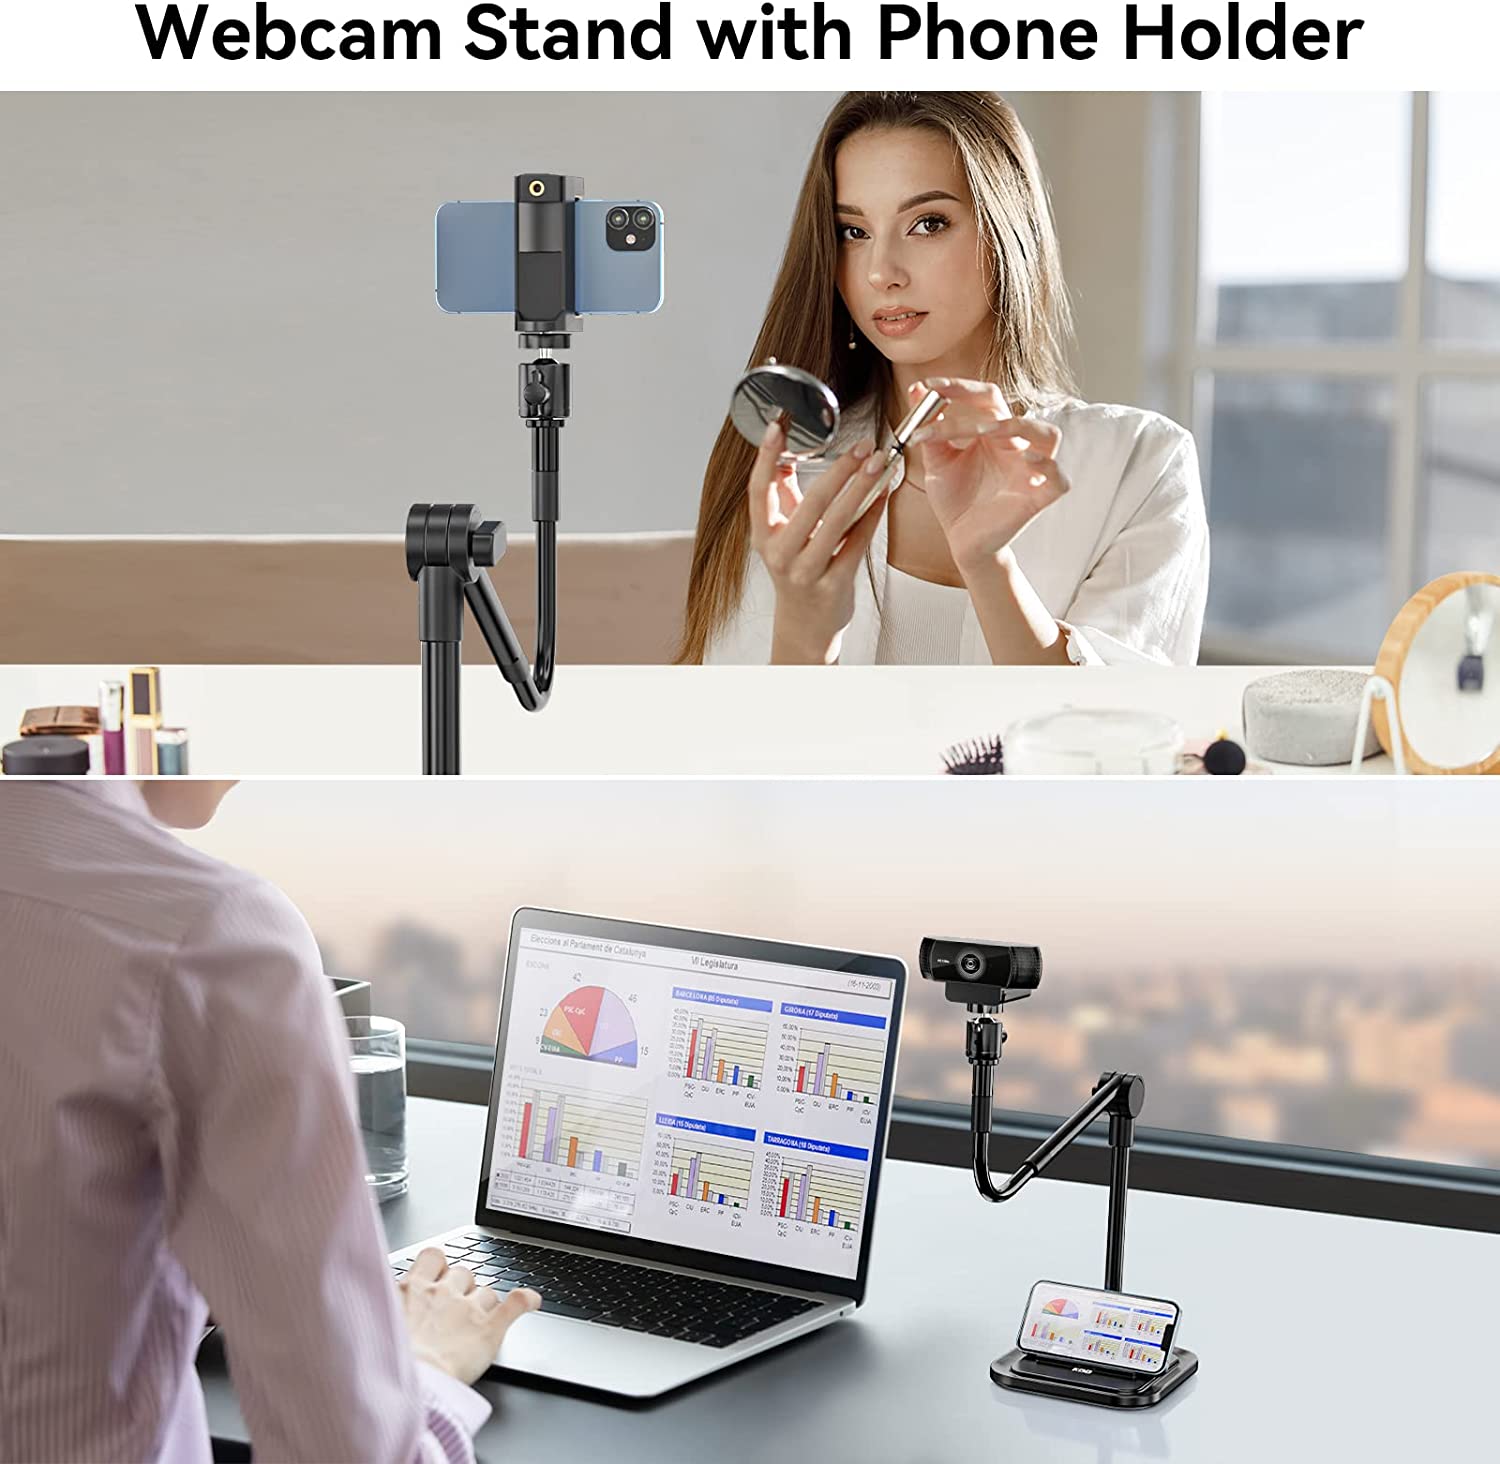 Webcam Stand with Phone Holder